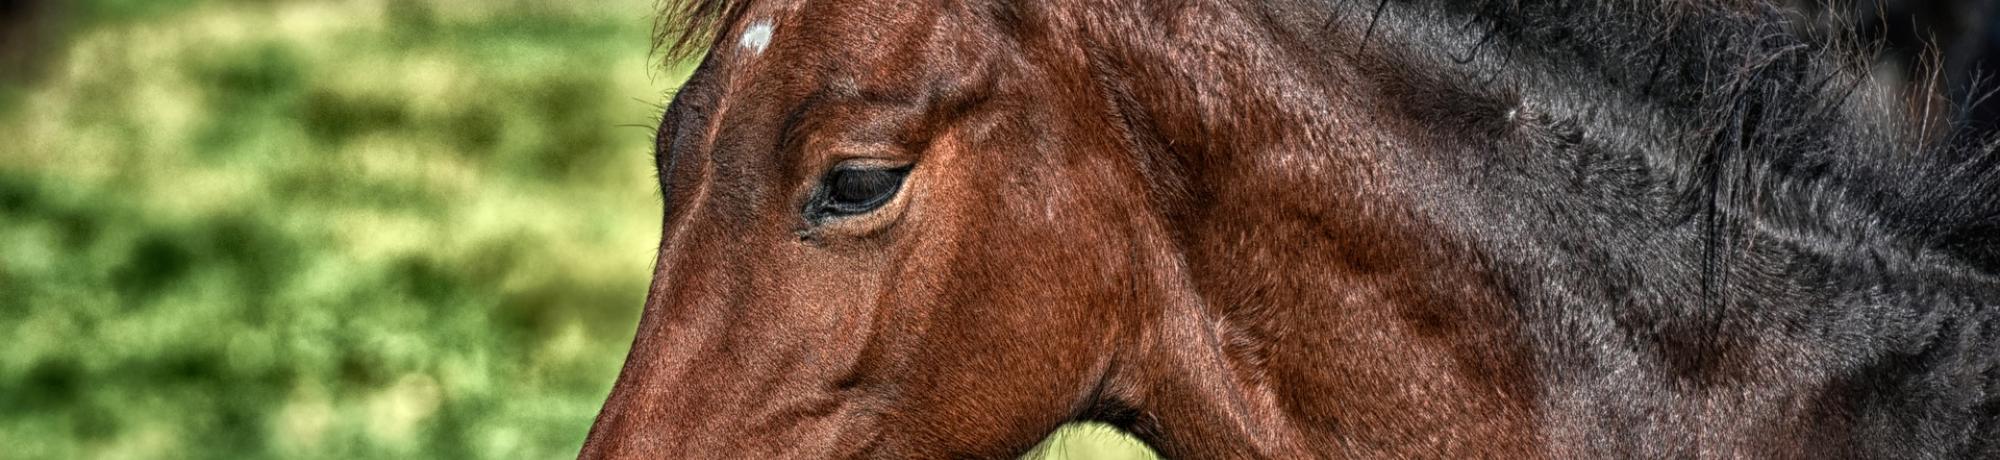 Image: Horse looking left with green outdoor background